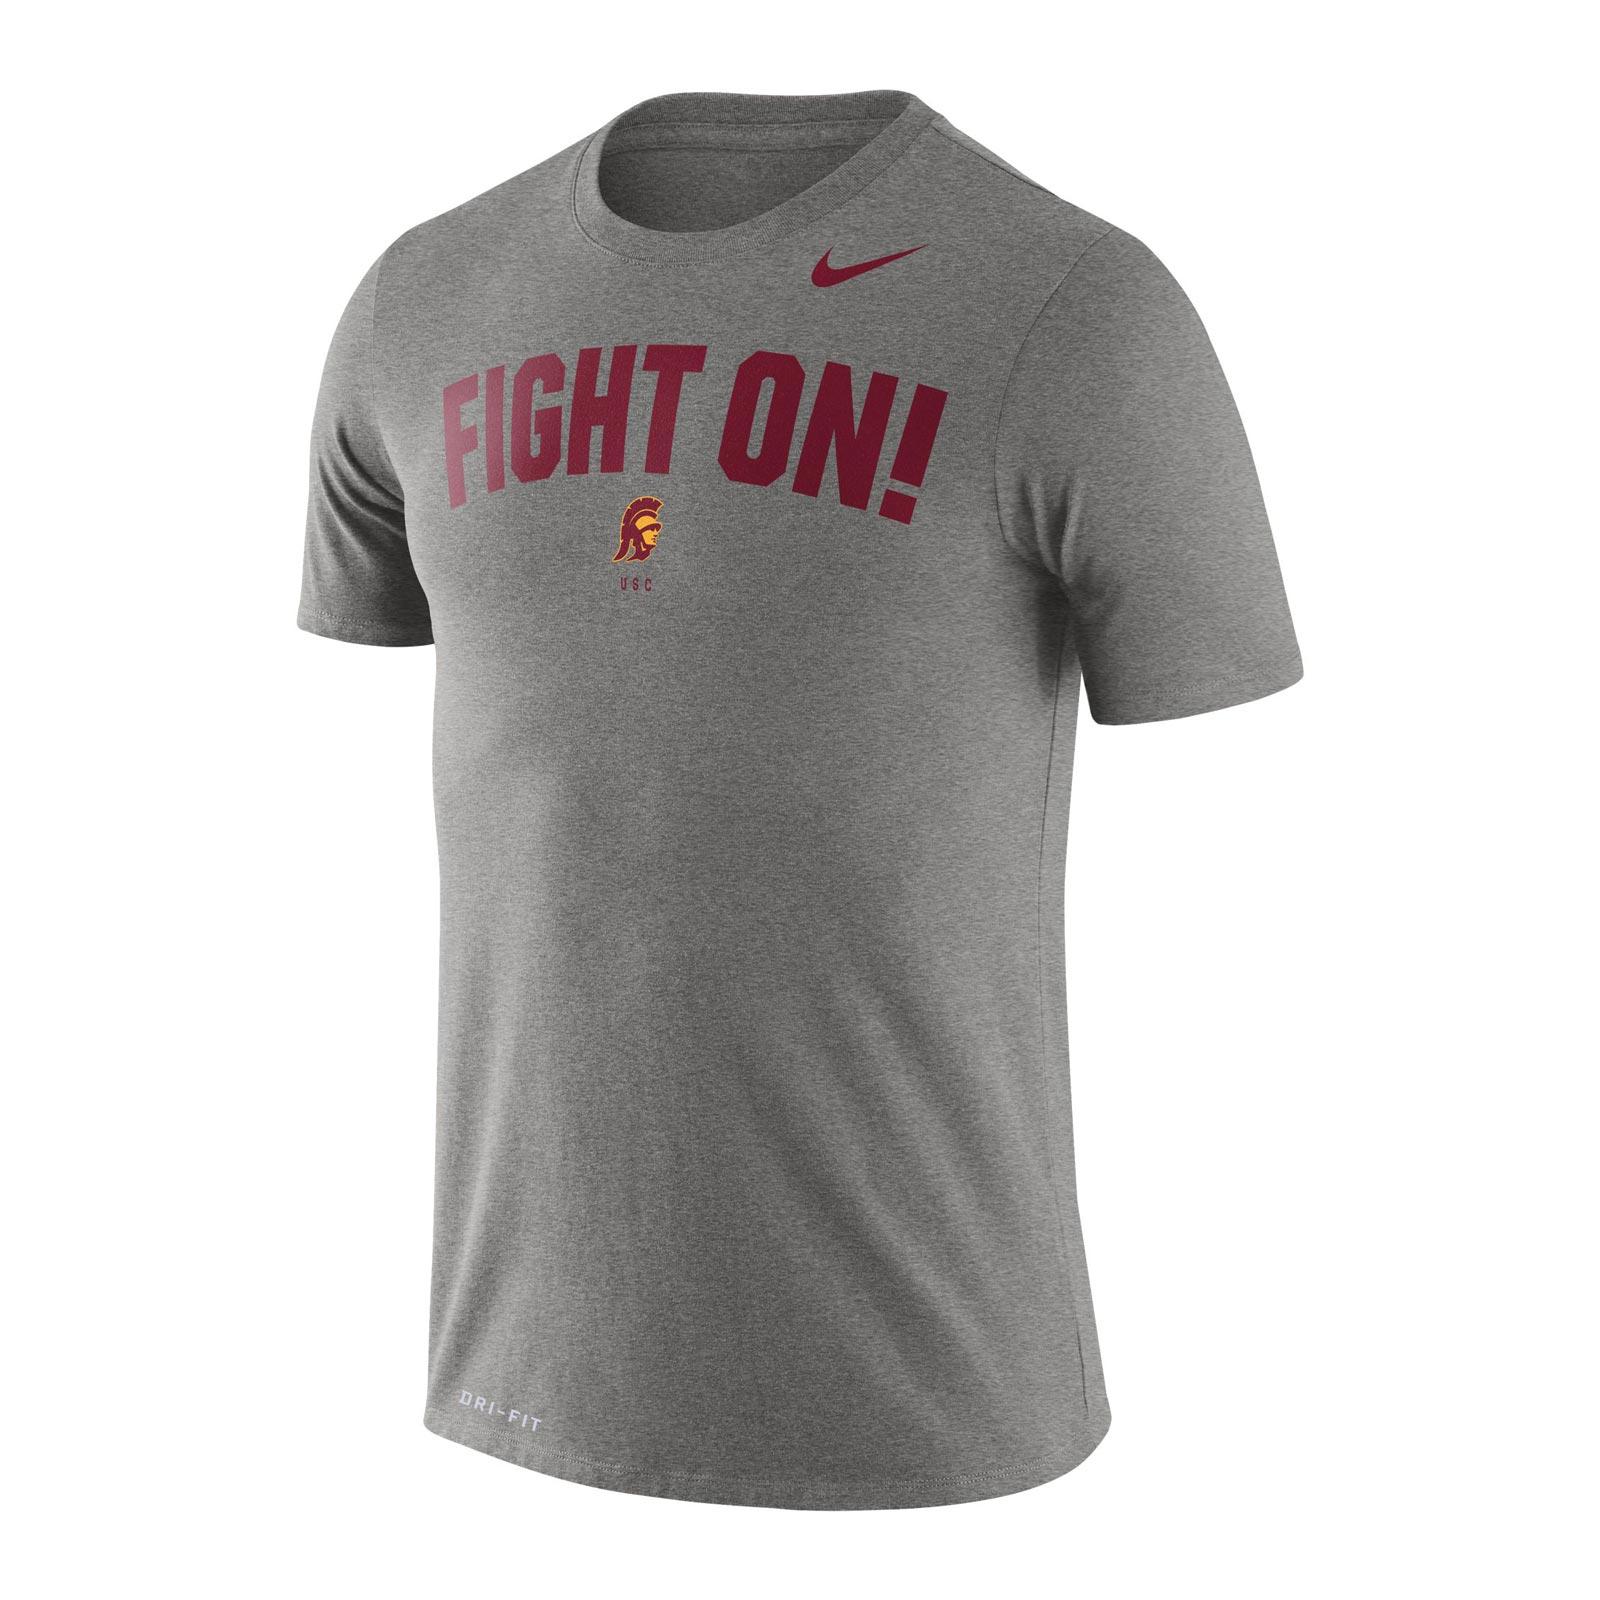 Fight On! Mens Dri-FIT Cotton Phrase SS Tee image01